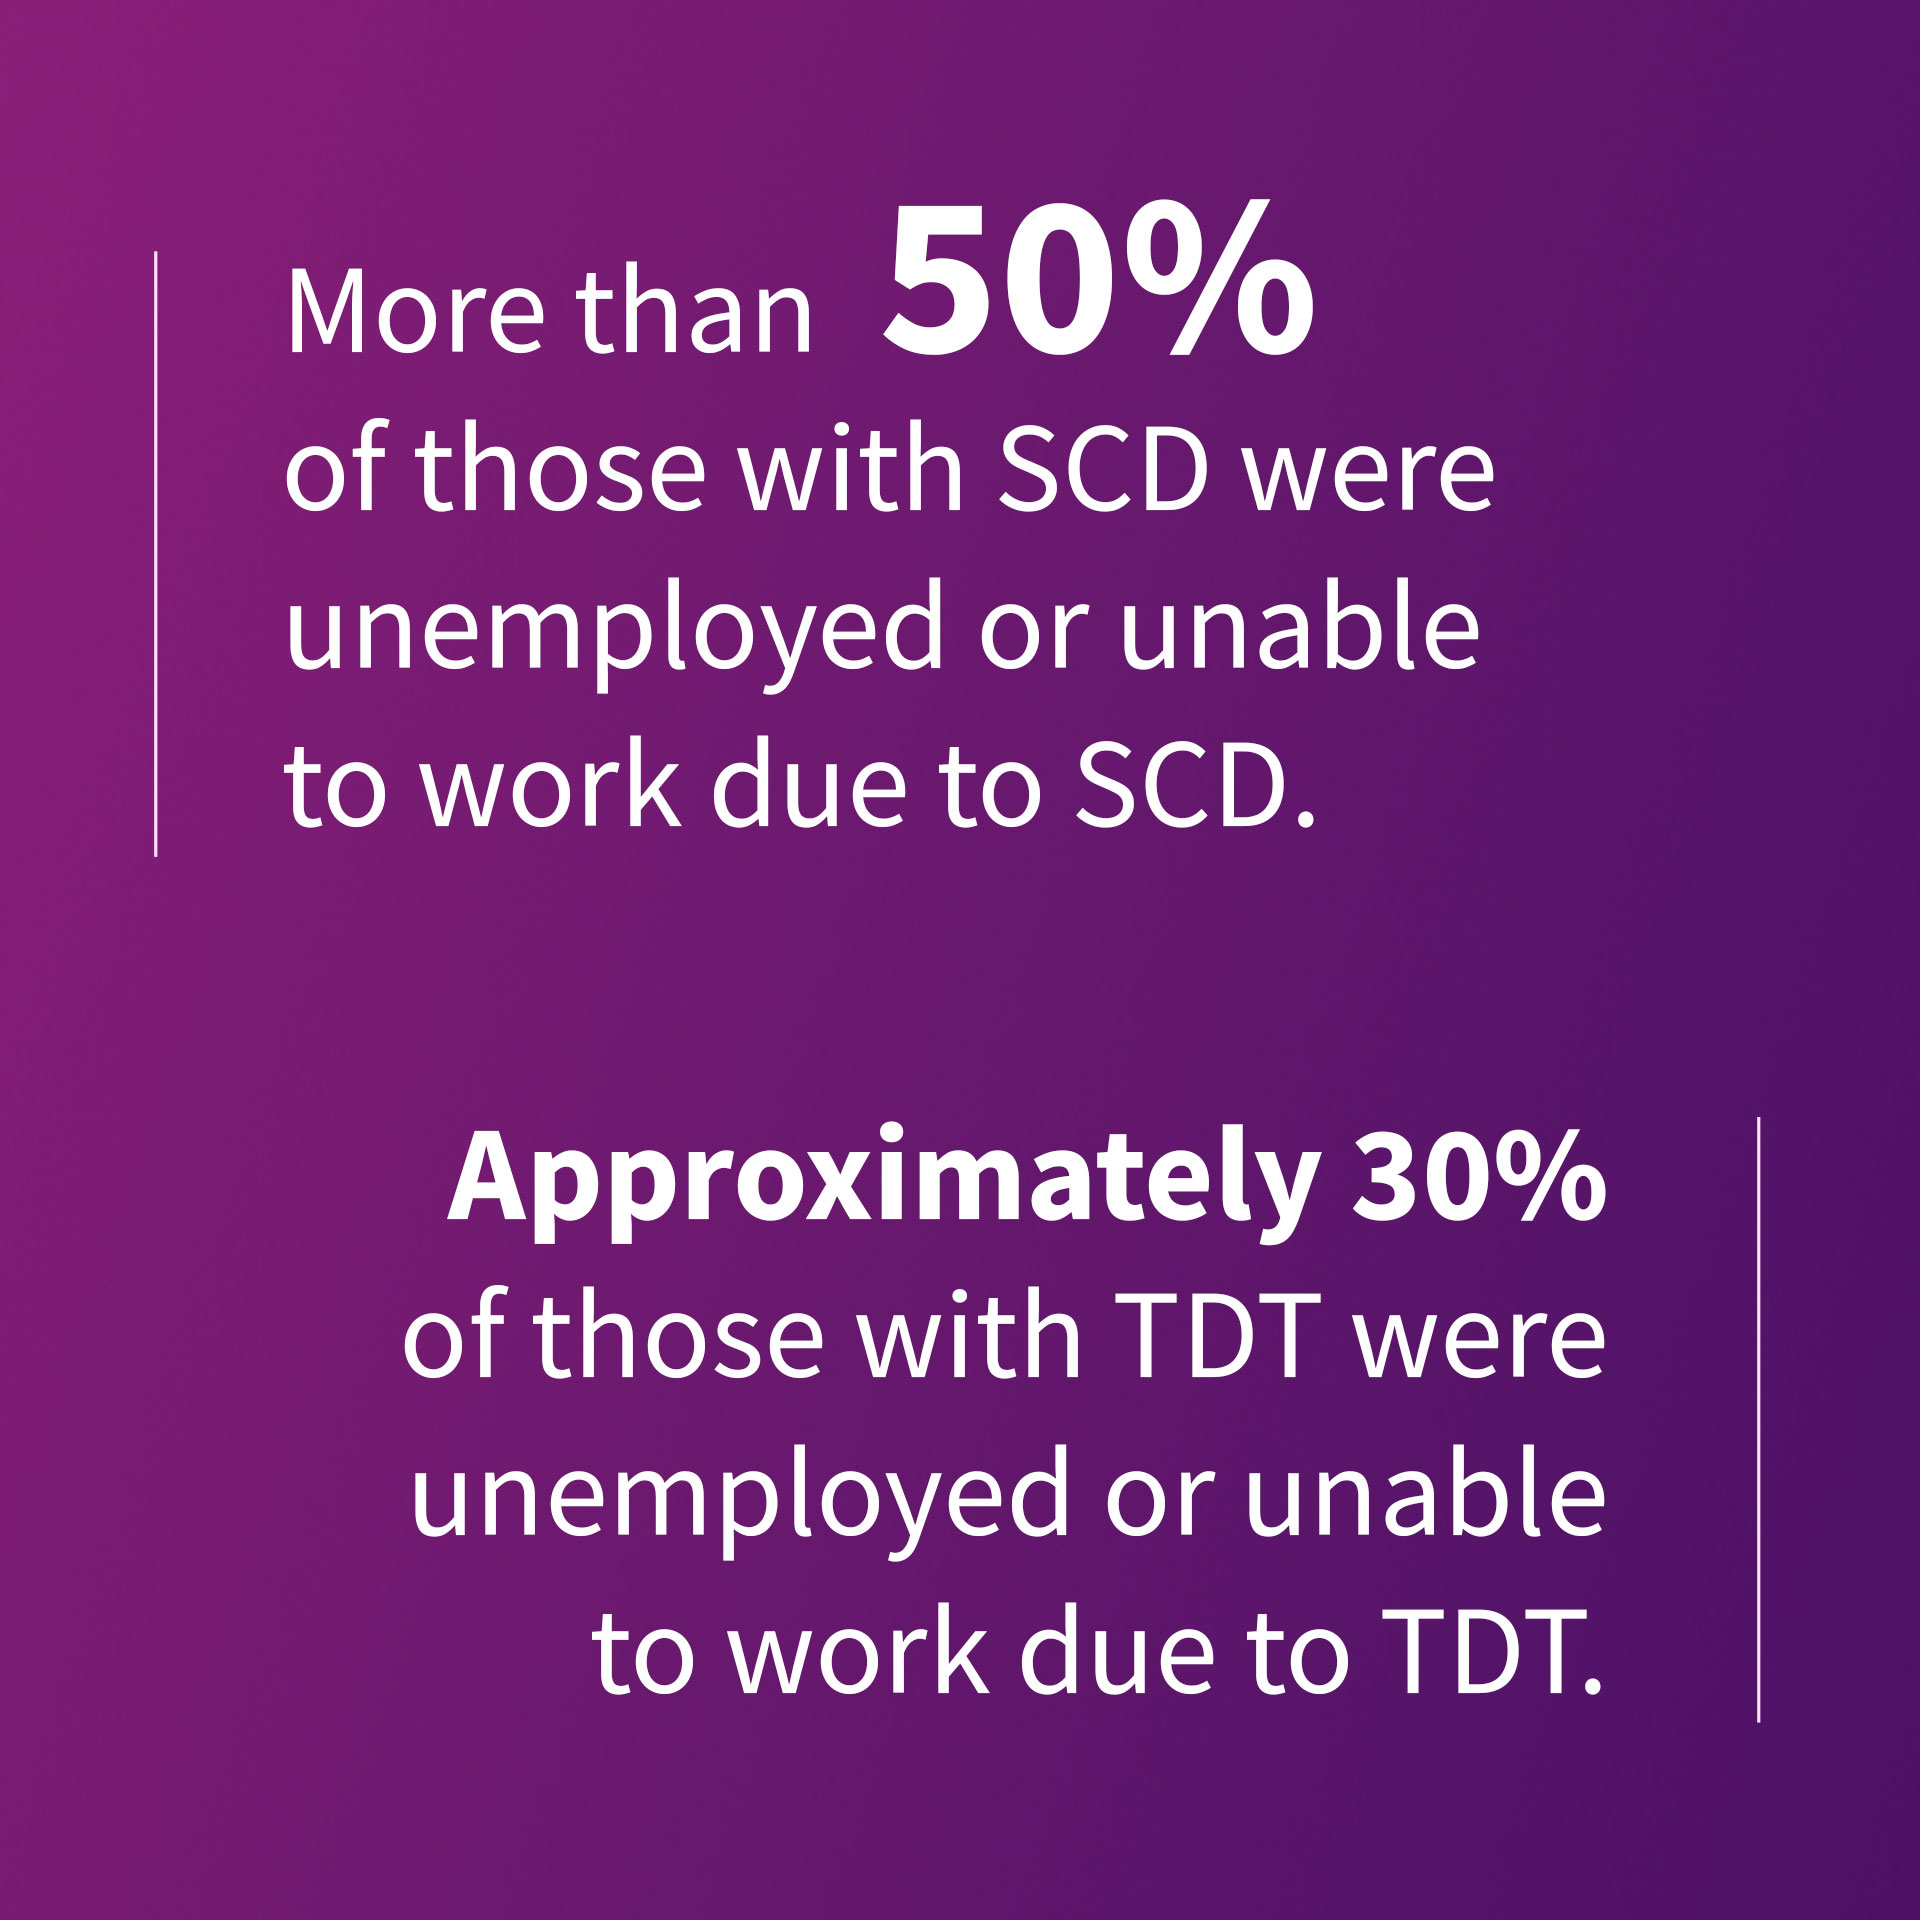 An infographic stating: More than 50% of those with SCD were unemployed or unable to work due to SCD. Approximately 30% of those with TDT were unemployed or unable to work due to TDT. 